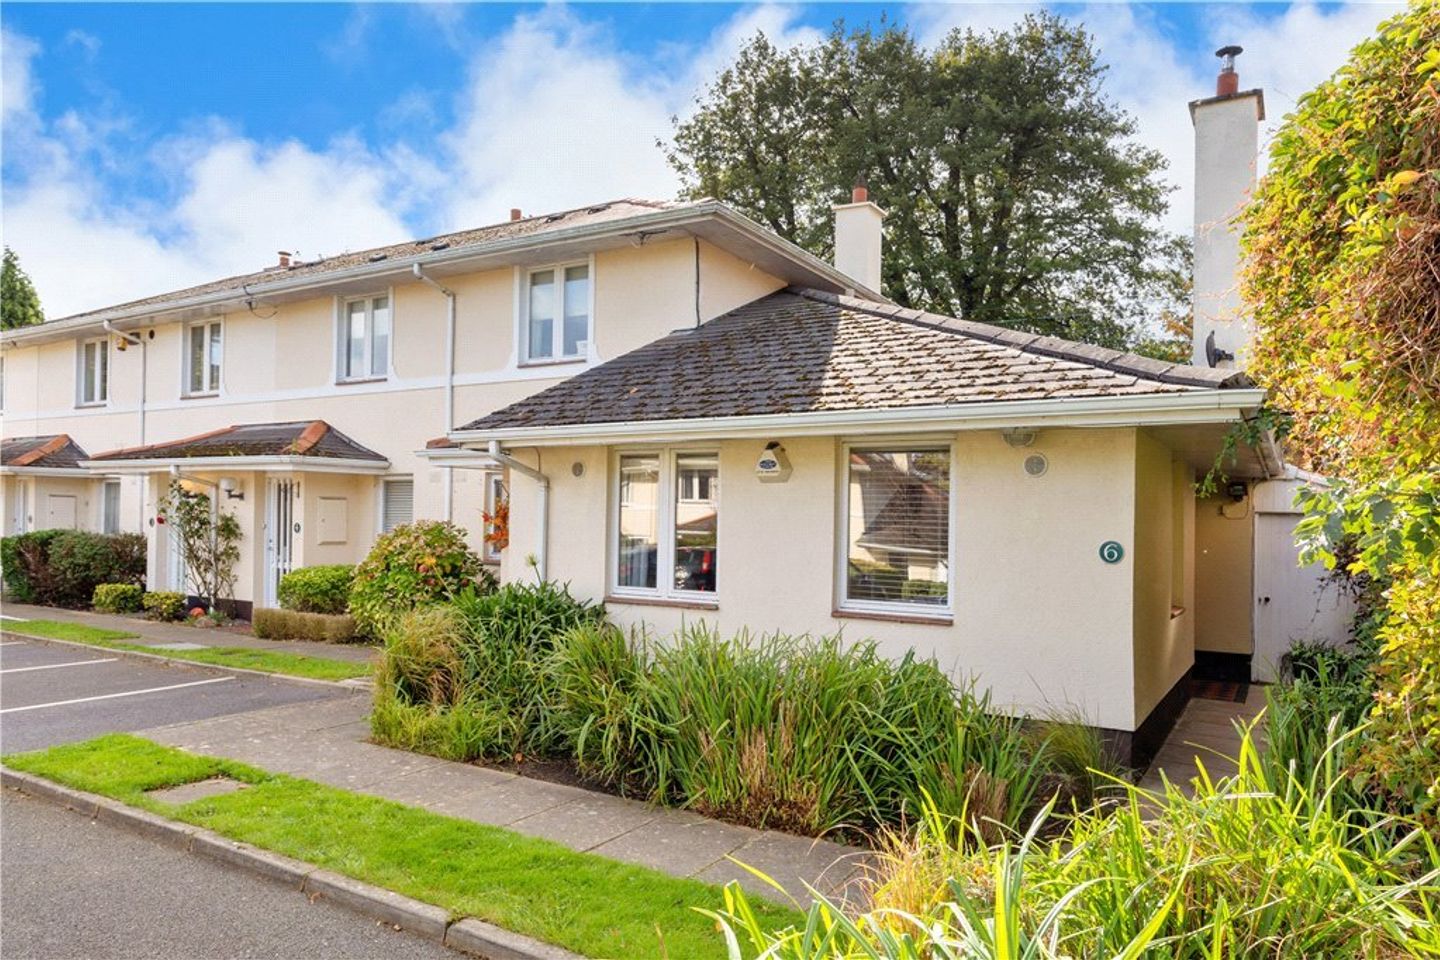 6 Beechlawn South Hill Avenue Booterstown, Booterstown, Co. Dublin, A94P231